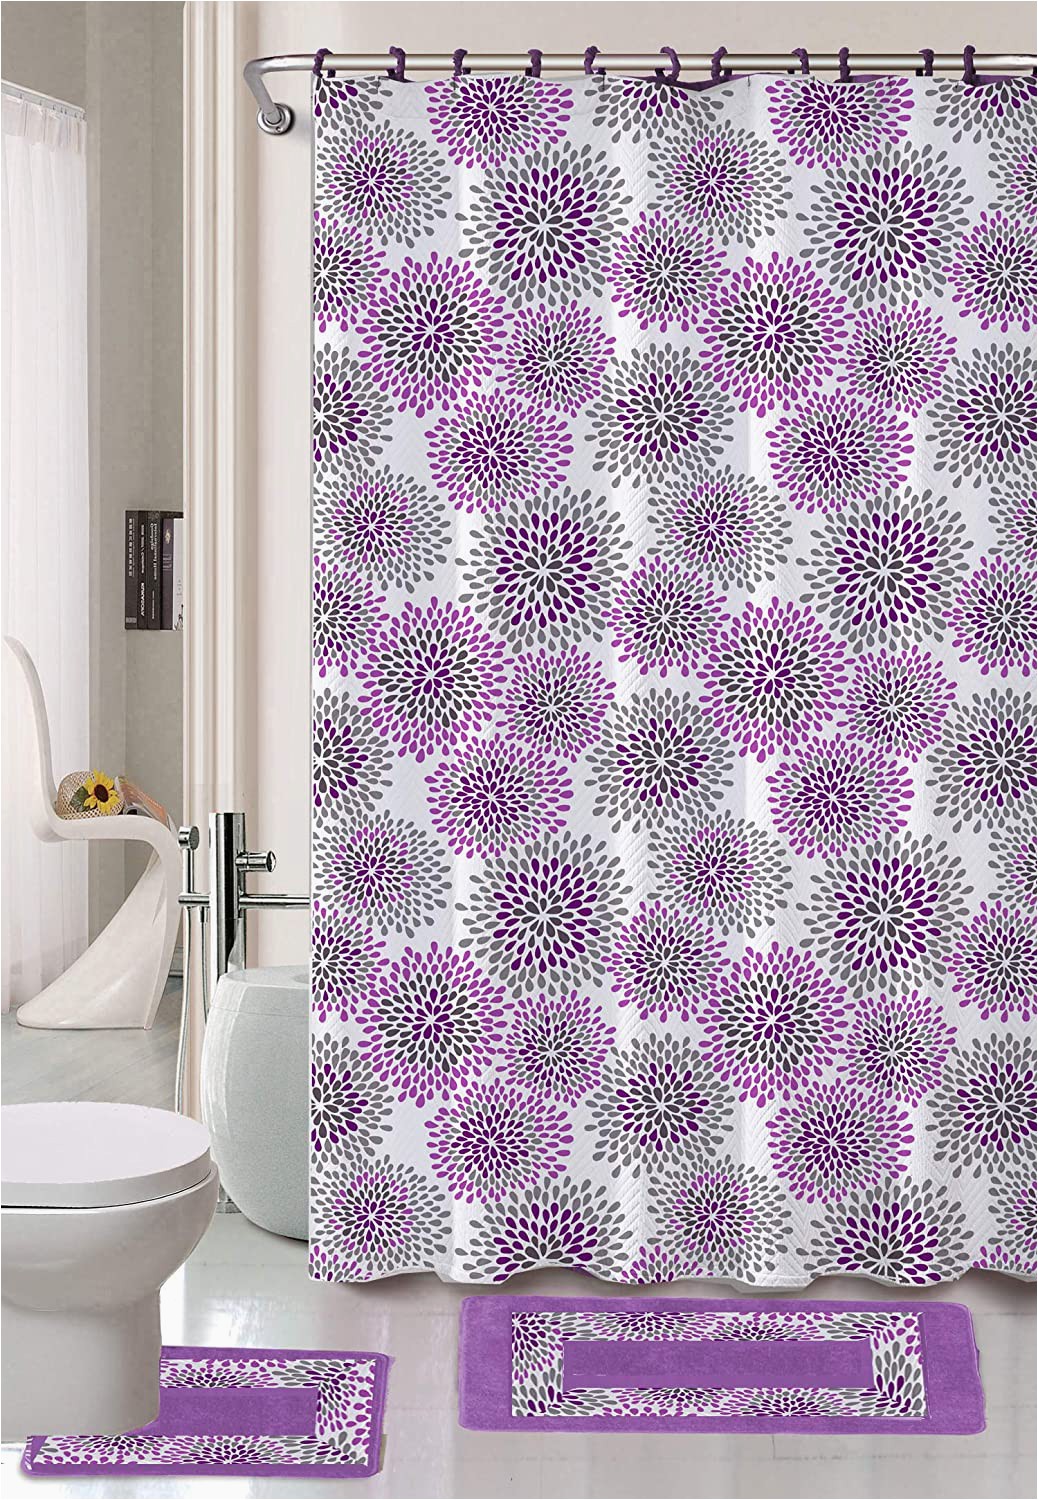 At Home Bathroom Rugs Luxury Home Collection 15 Pc Bath Rug Set Printed Non Slip Bathroom Rug Mat and Rug Contour and Shower Curtain and Rings Hooks New Lilac Light